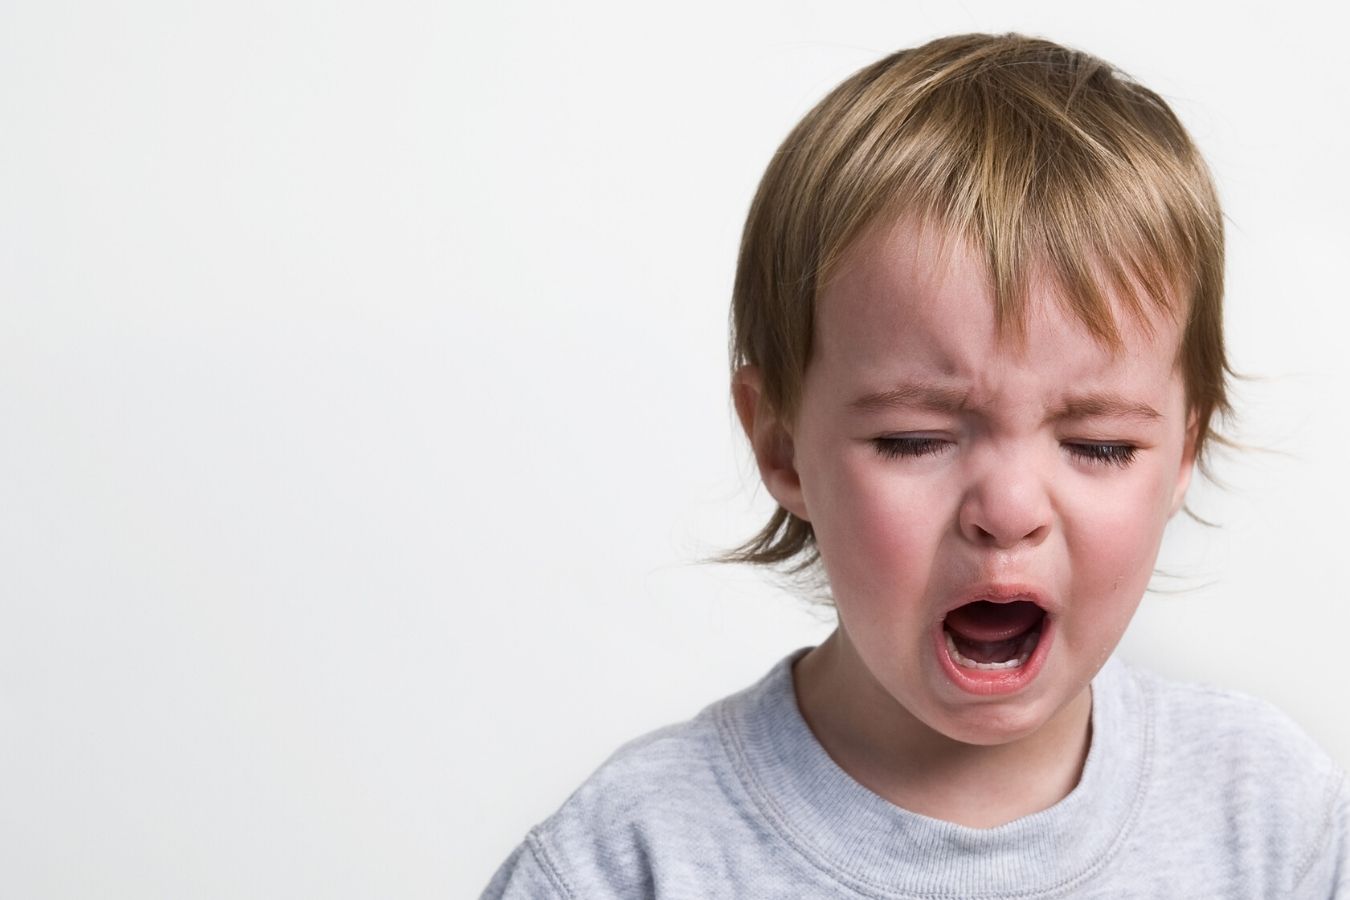 kids crying images